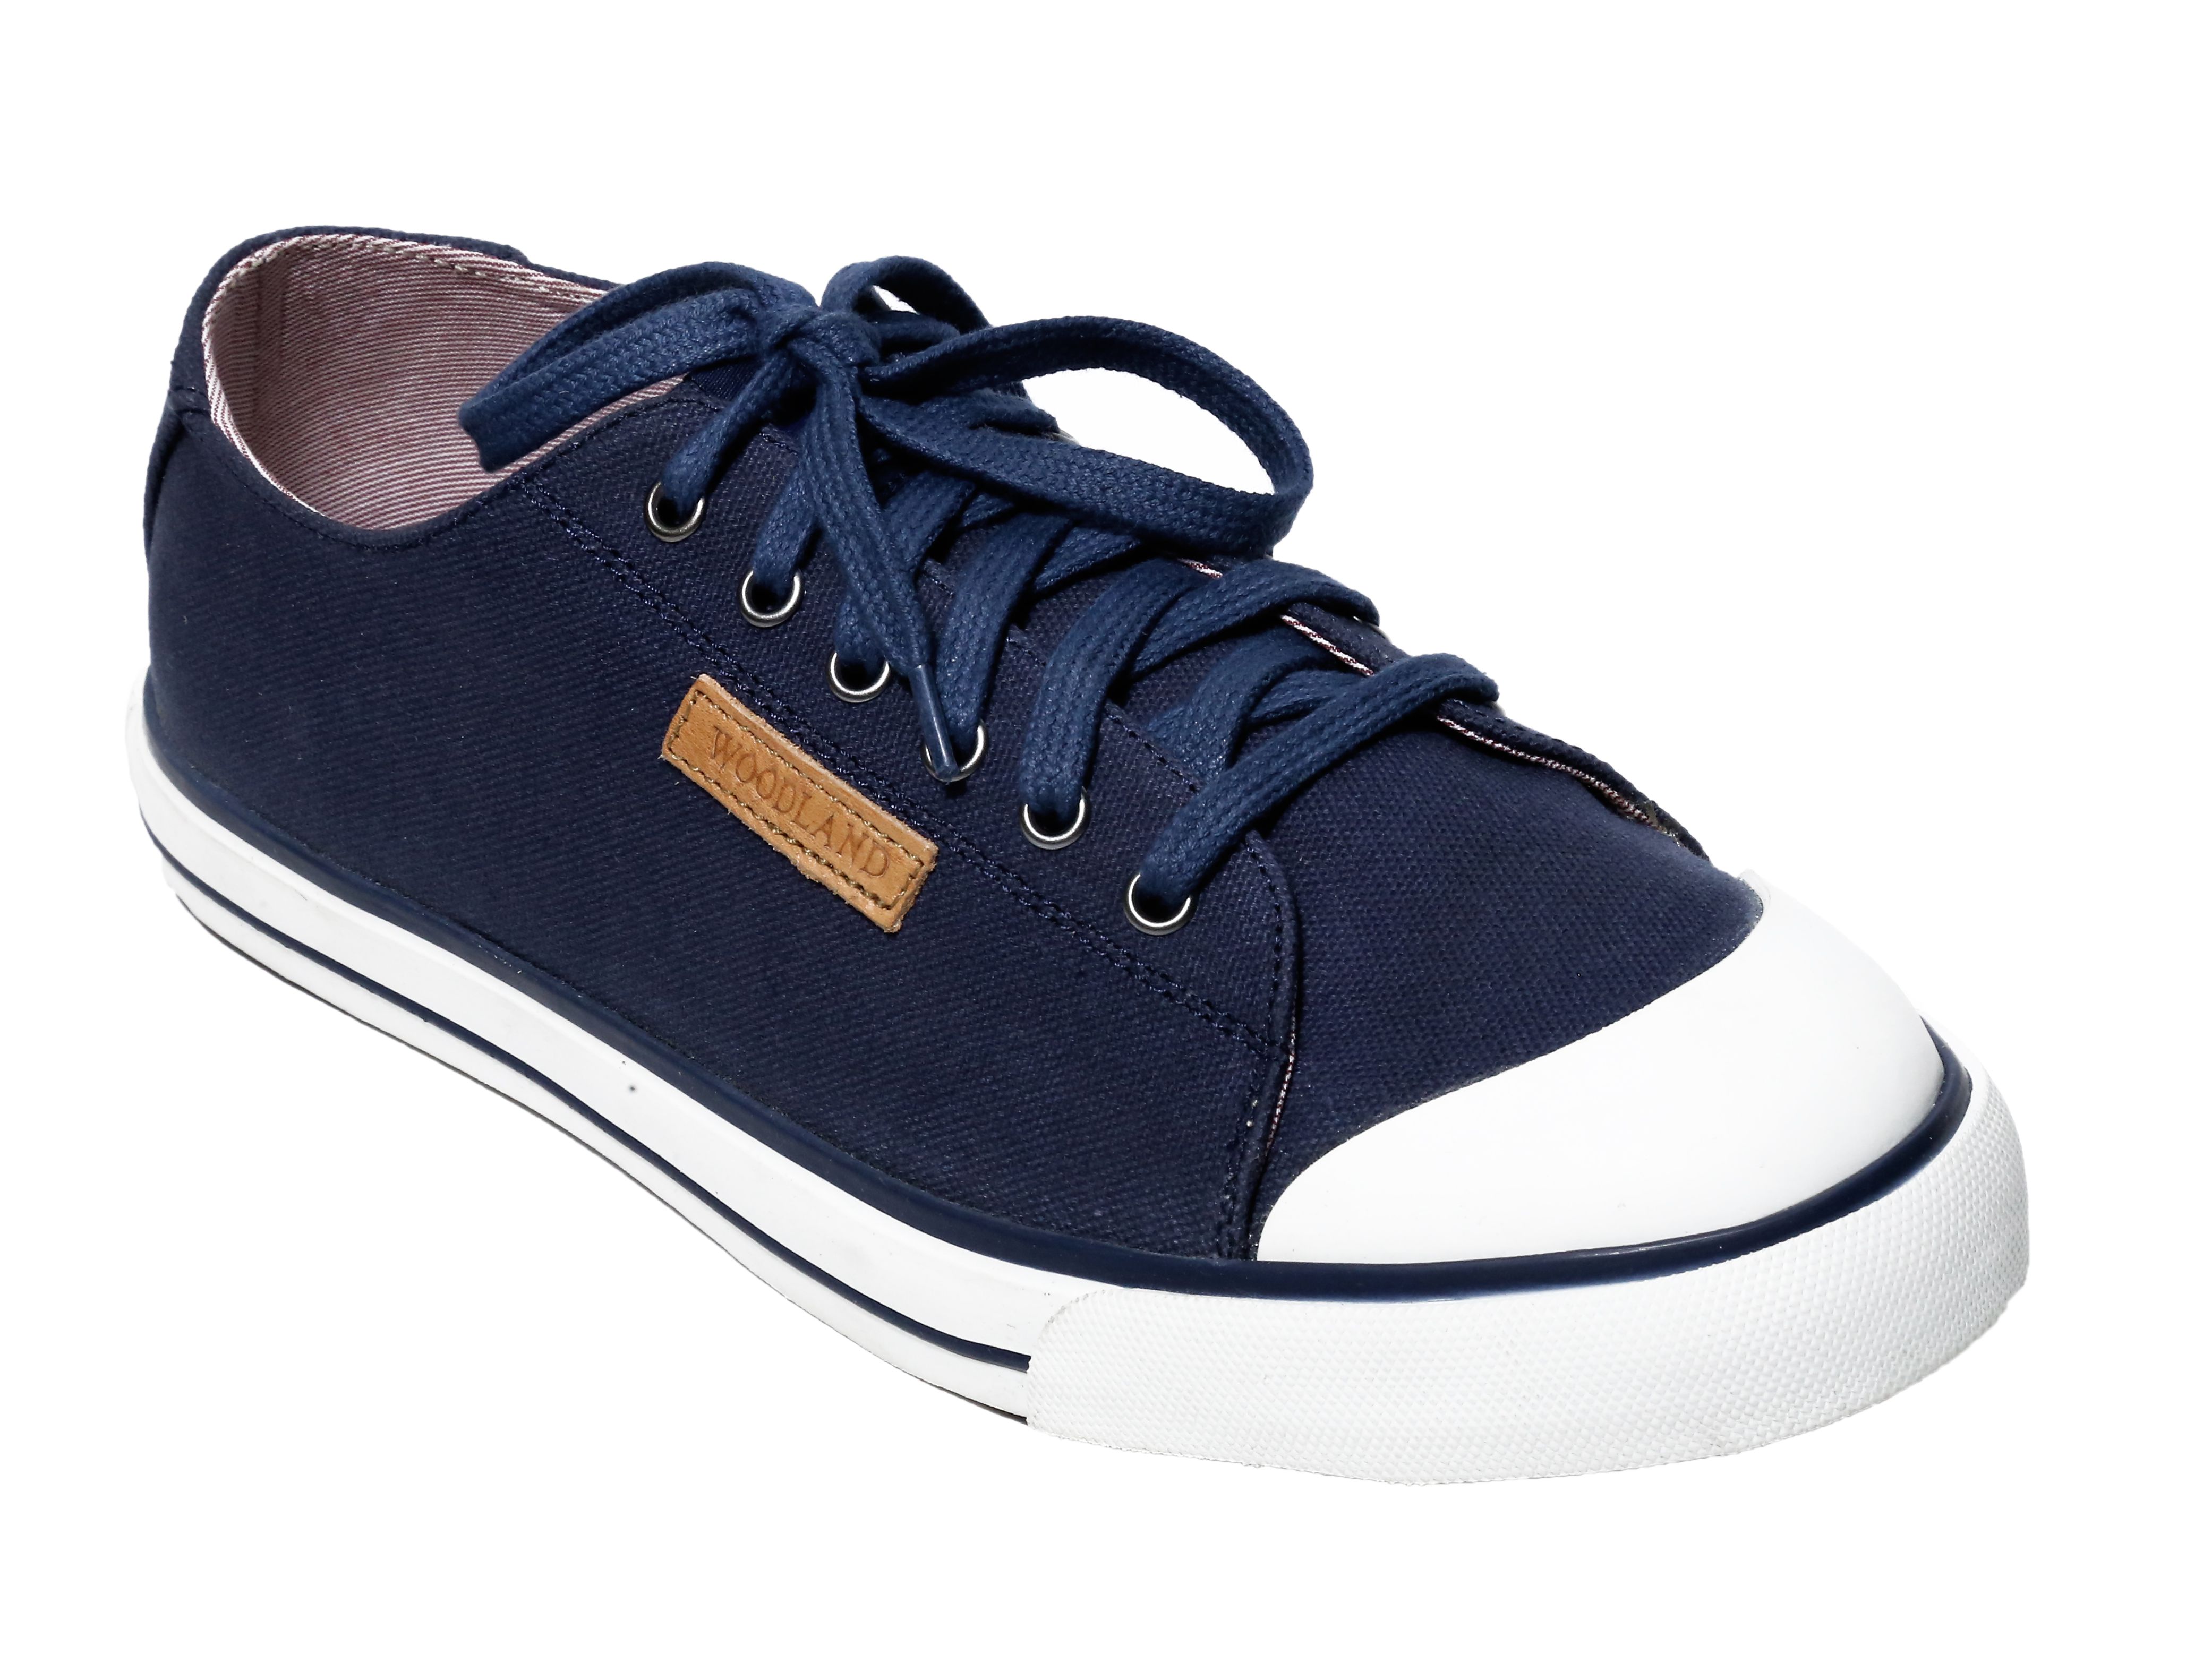 WOODLAND GC 1951115C / BLUE-NAVY Sneakers Blue Casual Shoes - Buy ...